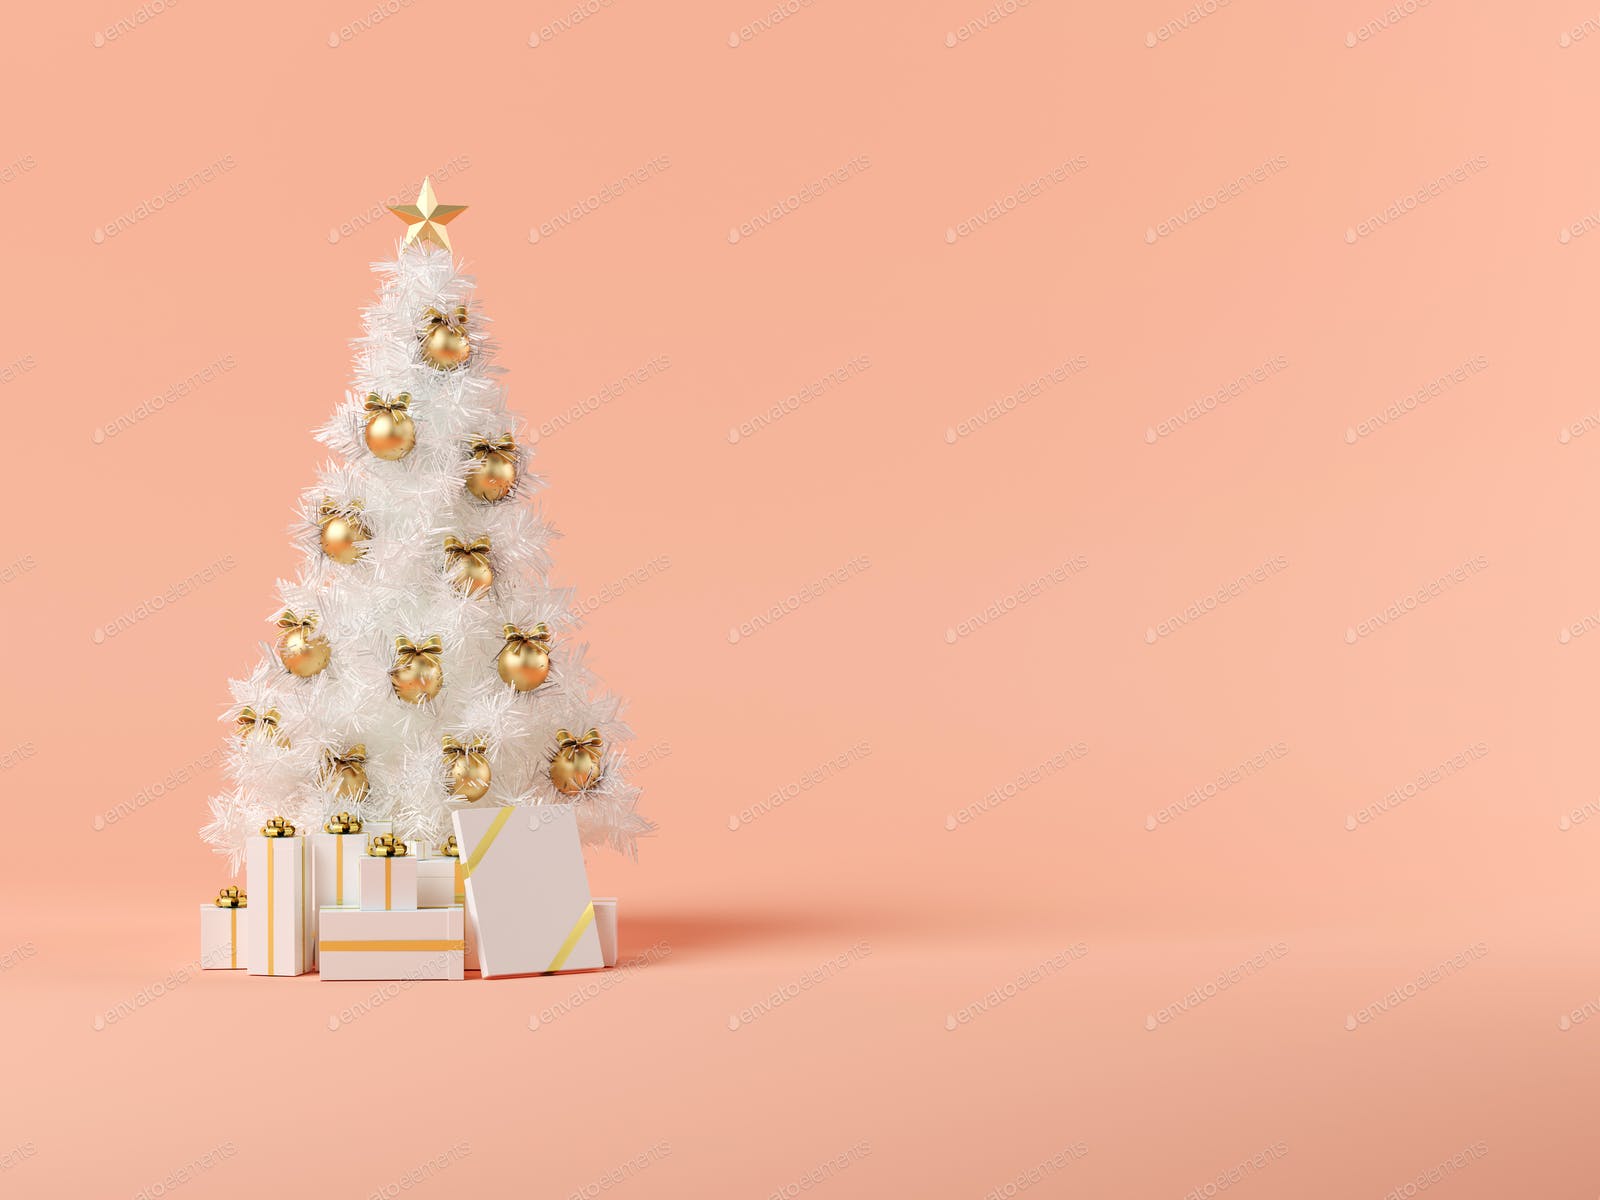 White christmas tree on pink background 3D illustration photo by hemul75 on Envato Elements